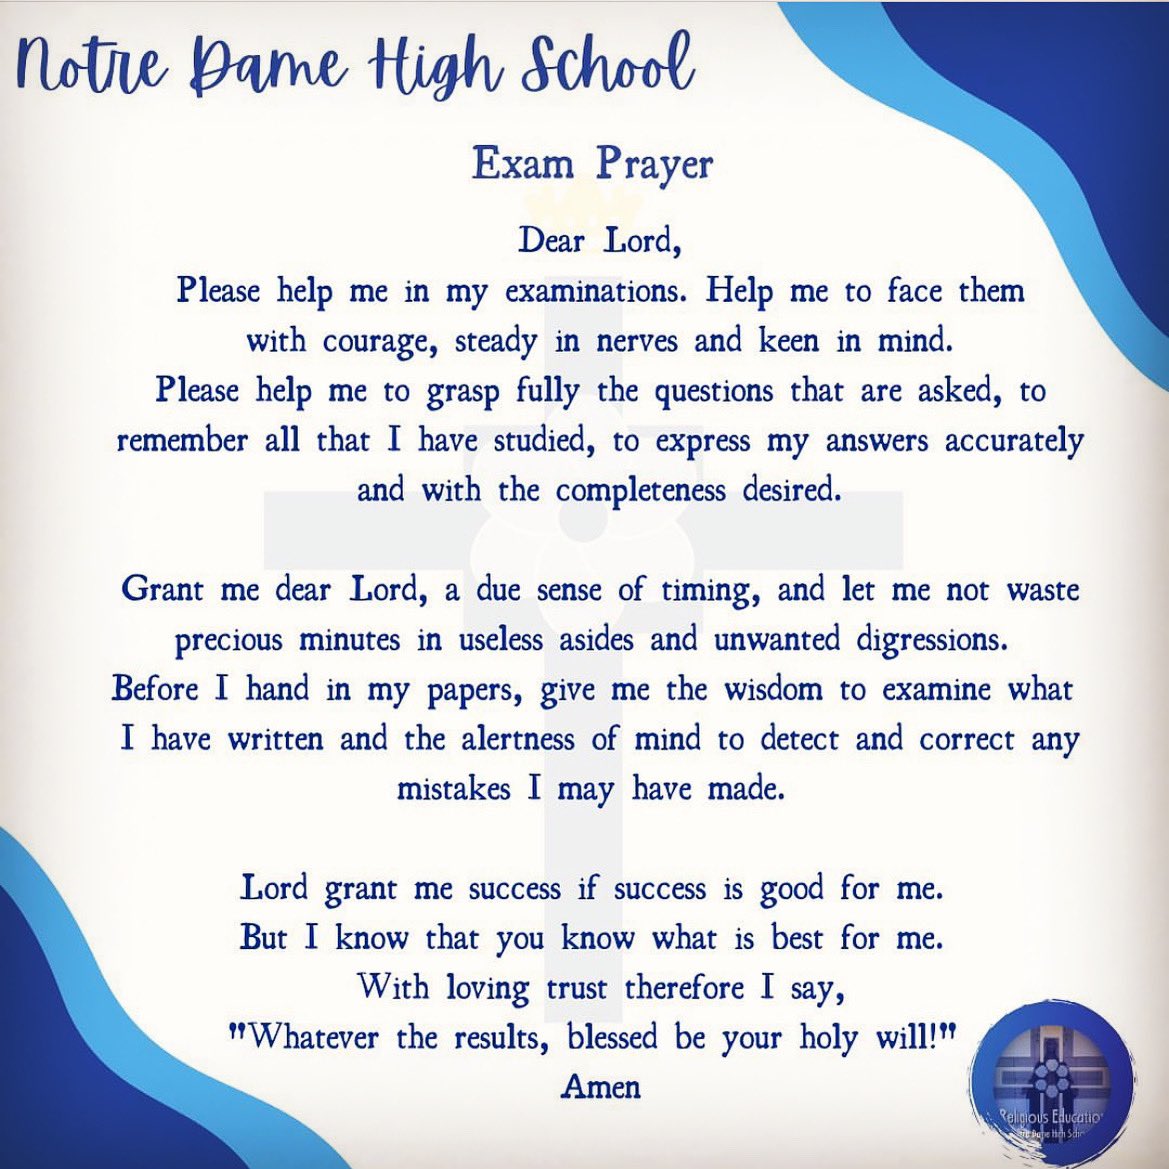 🙏🏻 Exam Prayer 🙏🏻
We encourage learners sitting exams to stay close to God, this prayer may help. Please join us in praying for all our young people and families, particularly those currently preparing for exams. #beliefperseverancerespect #loveandambition #thisishowwedoithere